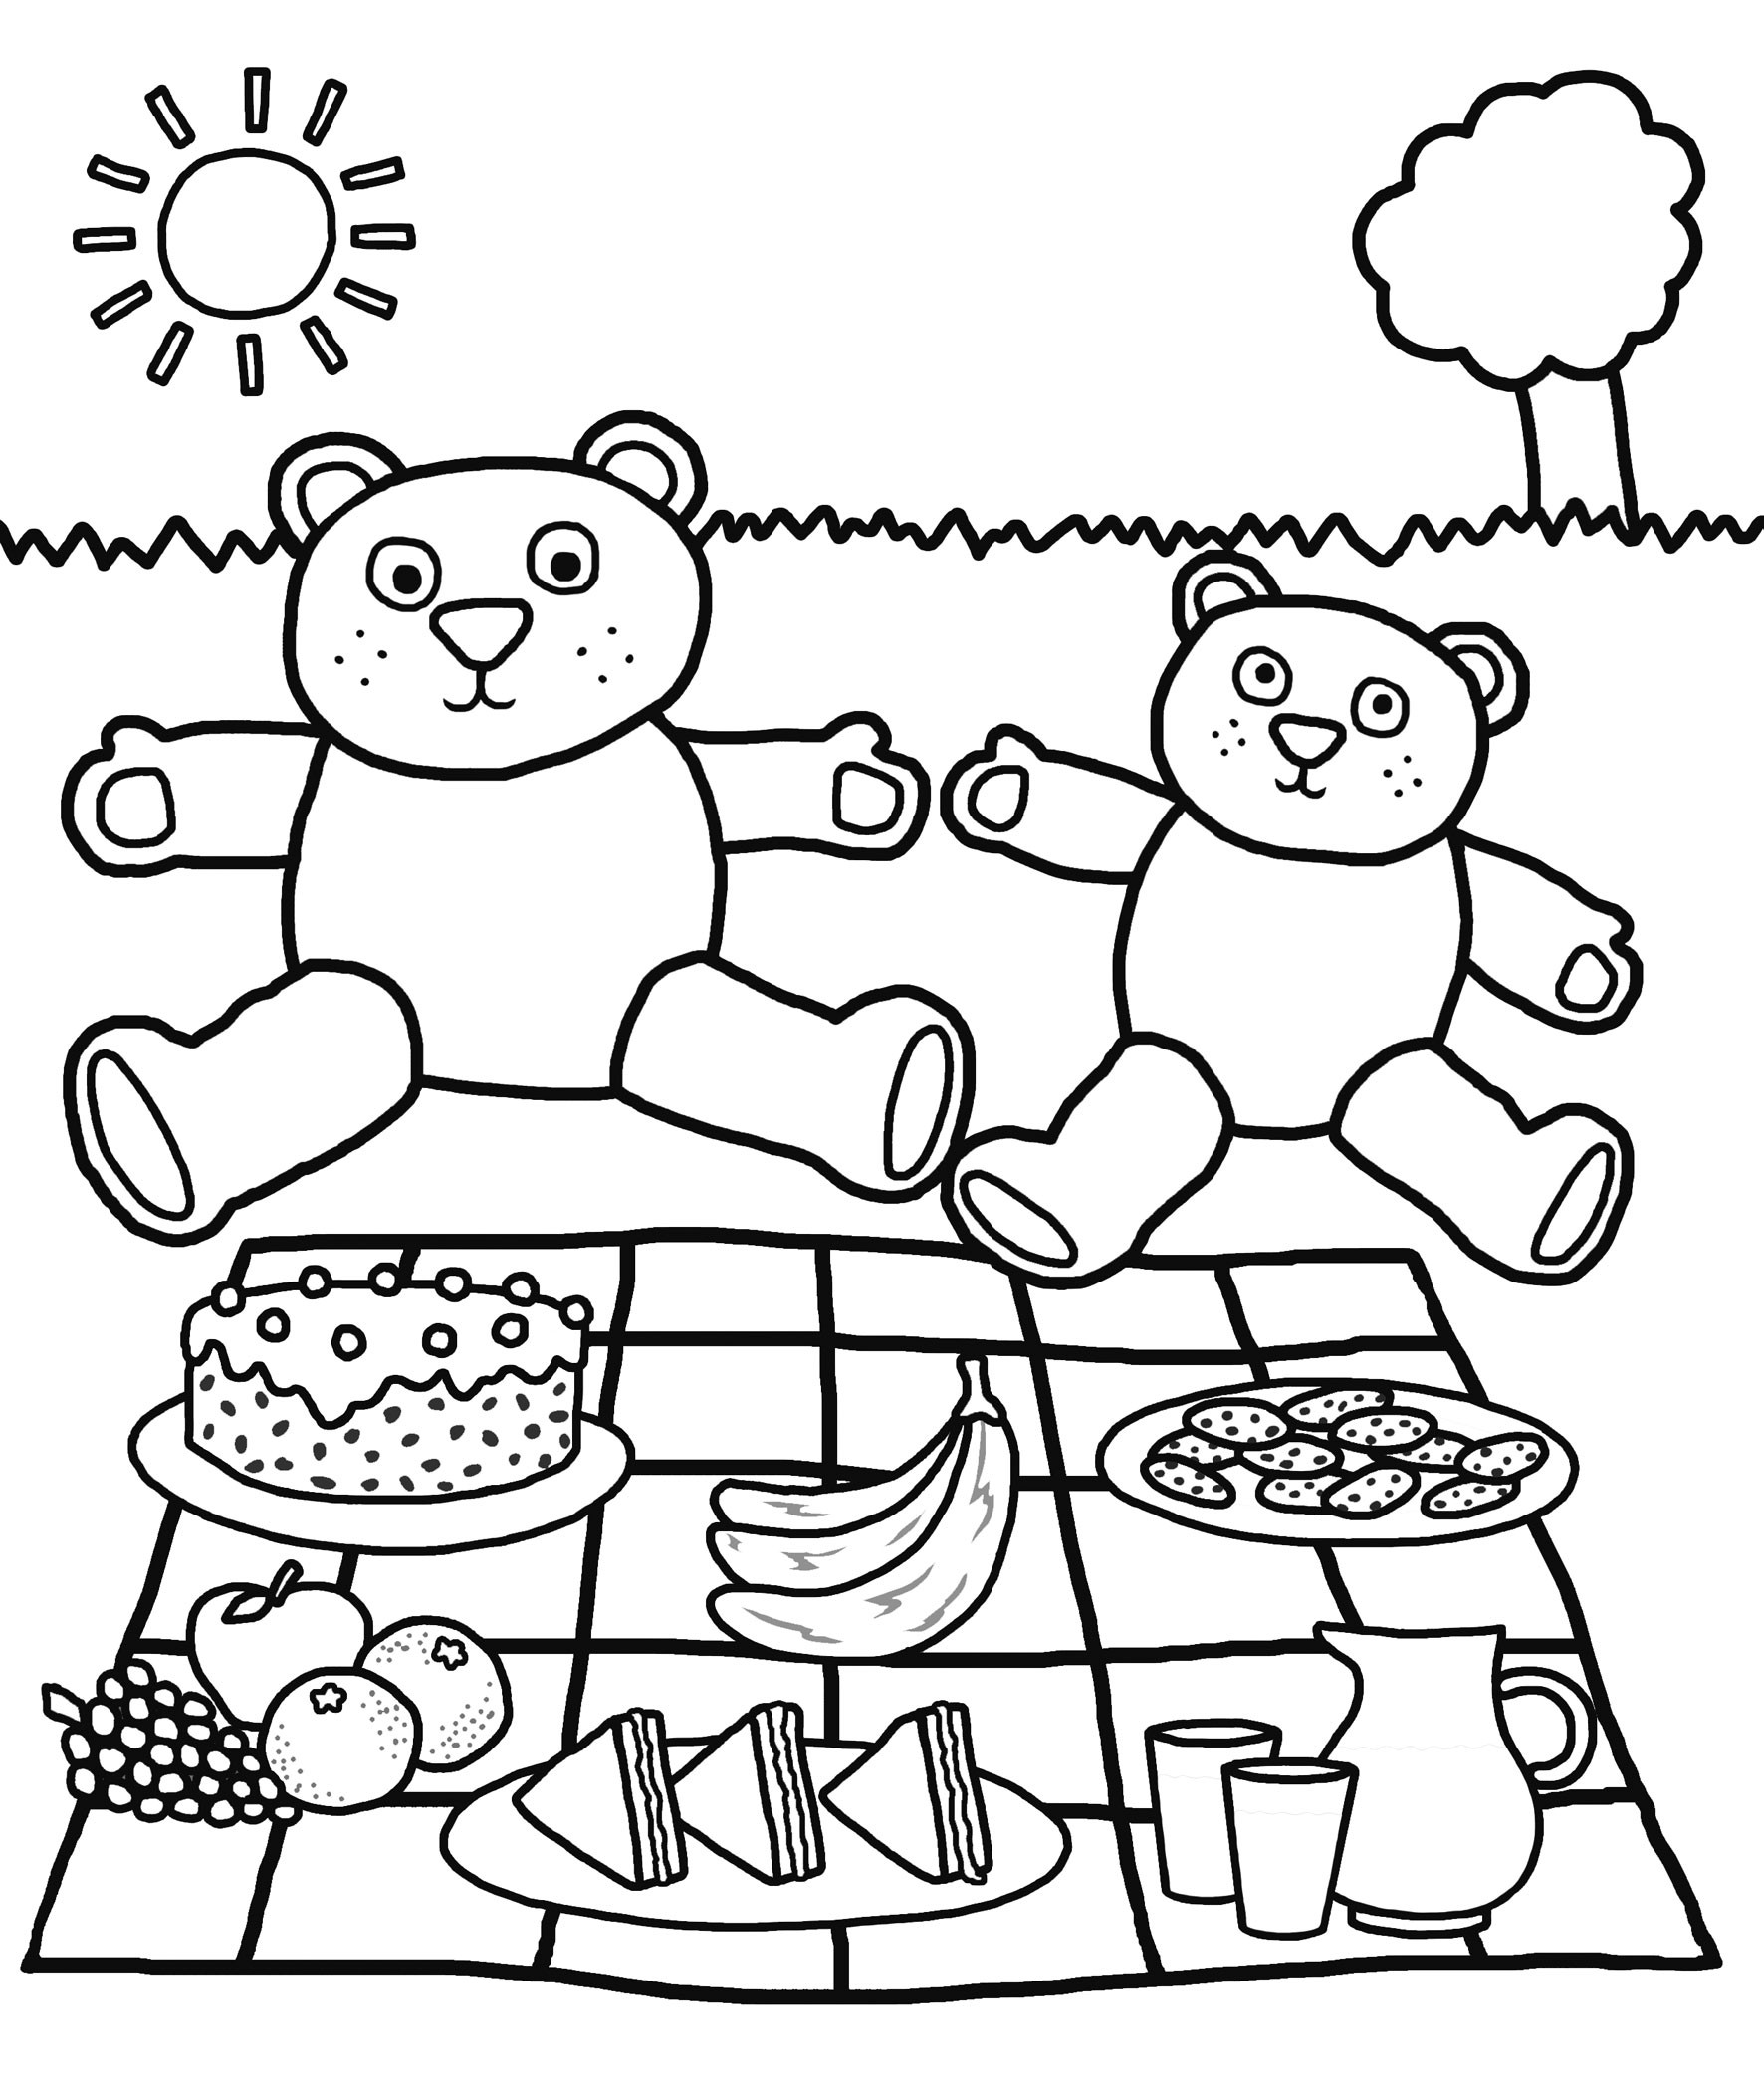 Free Coloring Sheets For Preschoolers
 Free Printable Kindergarten Coloring Pages For Kids